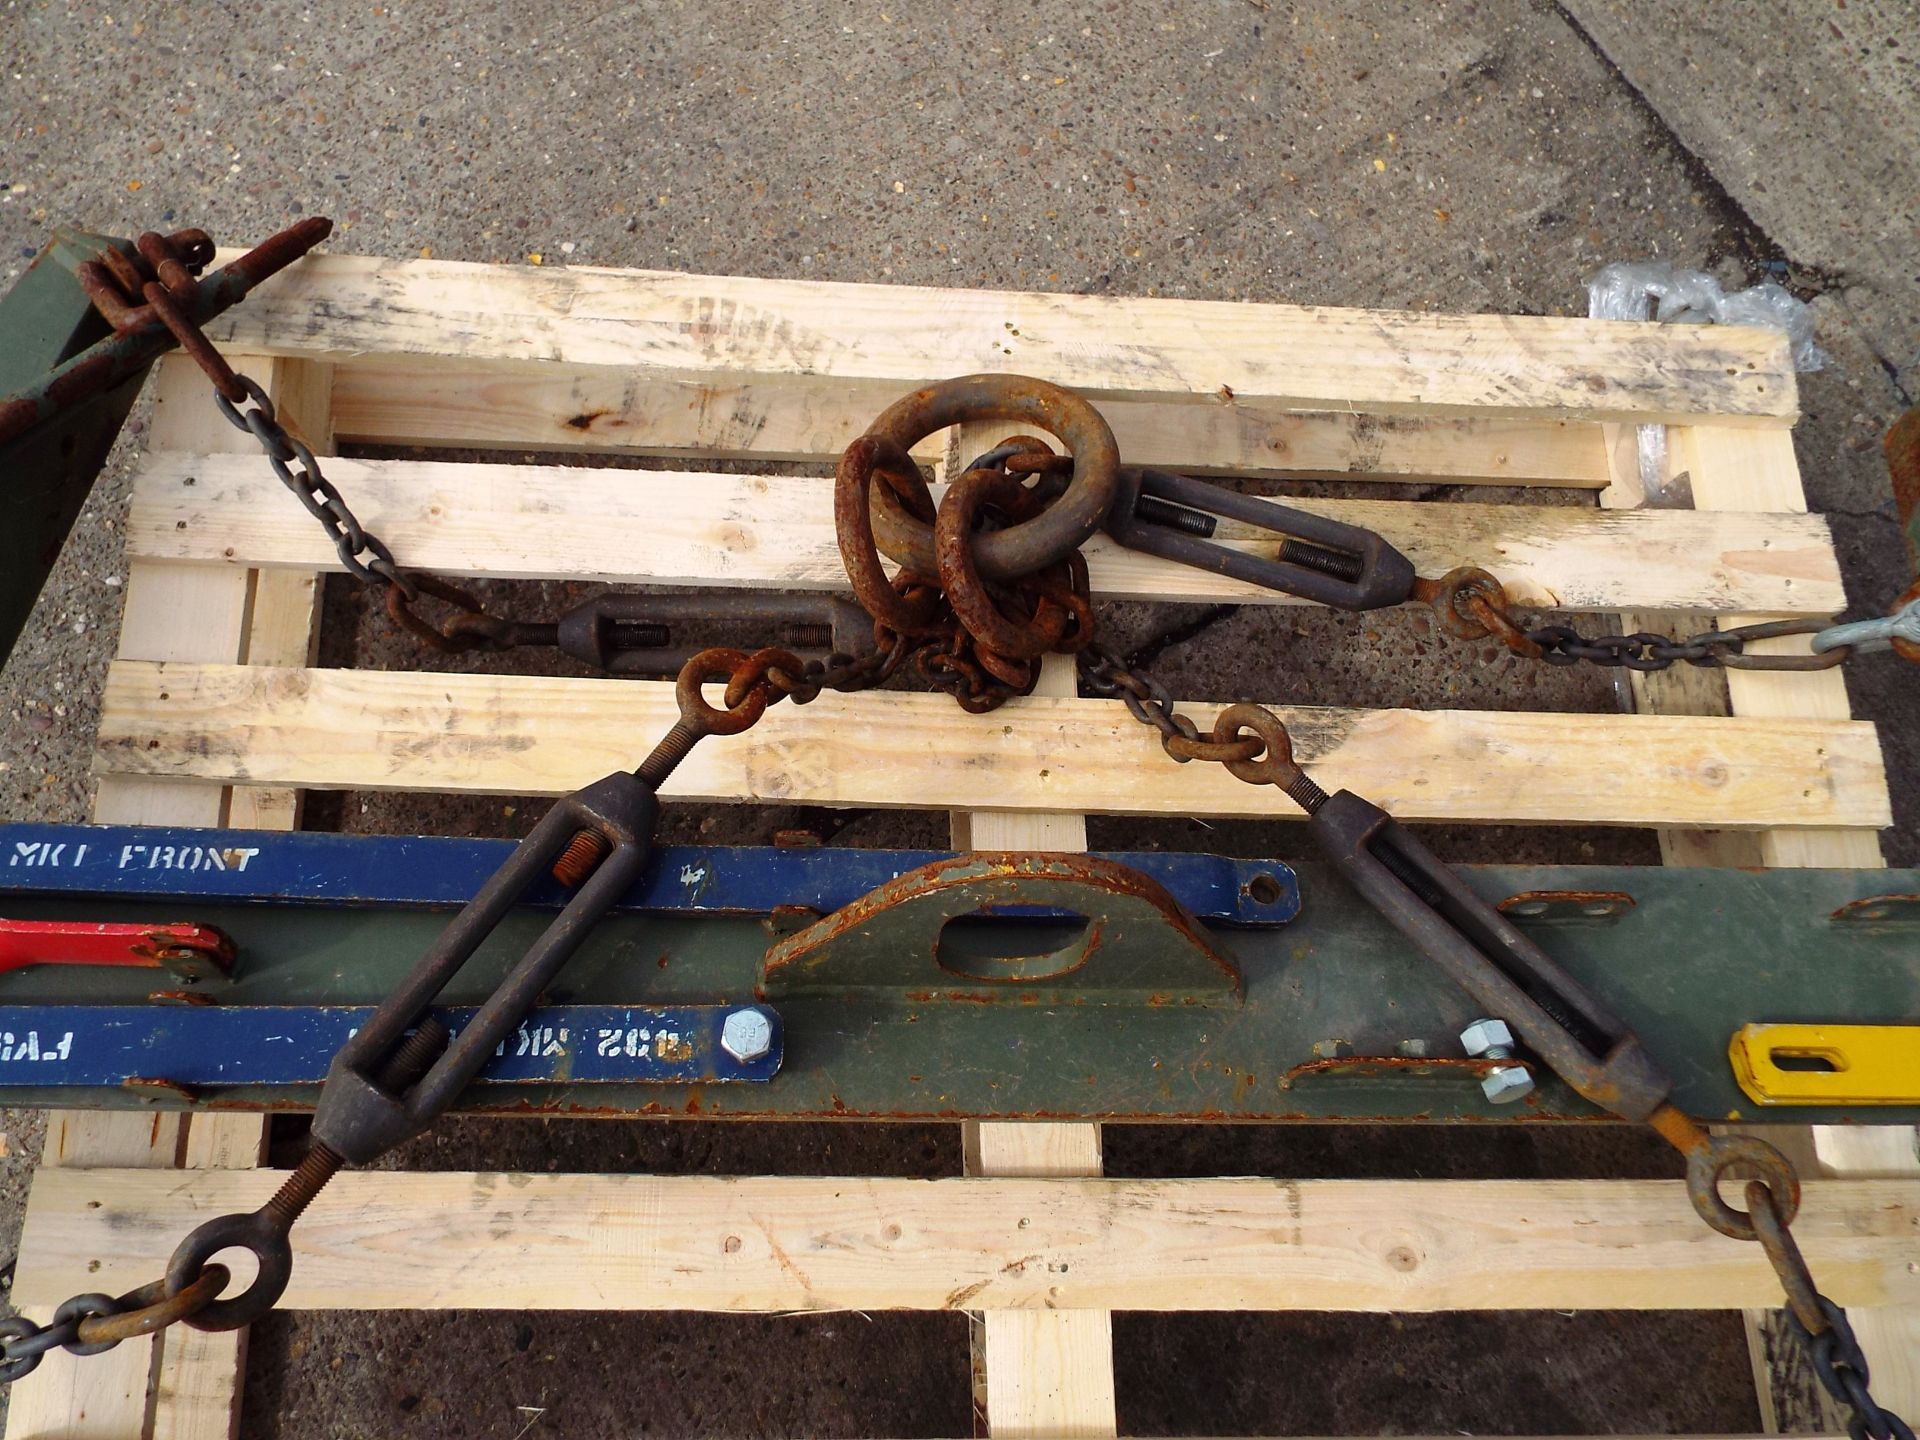 Extremely Rare Original FV432 Pack Lifting Frame with Attachments - Image 4 of 6